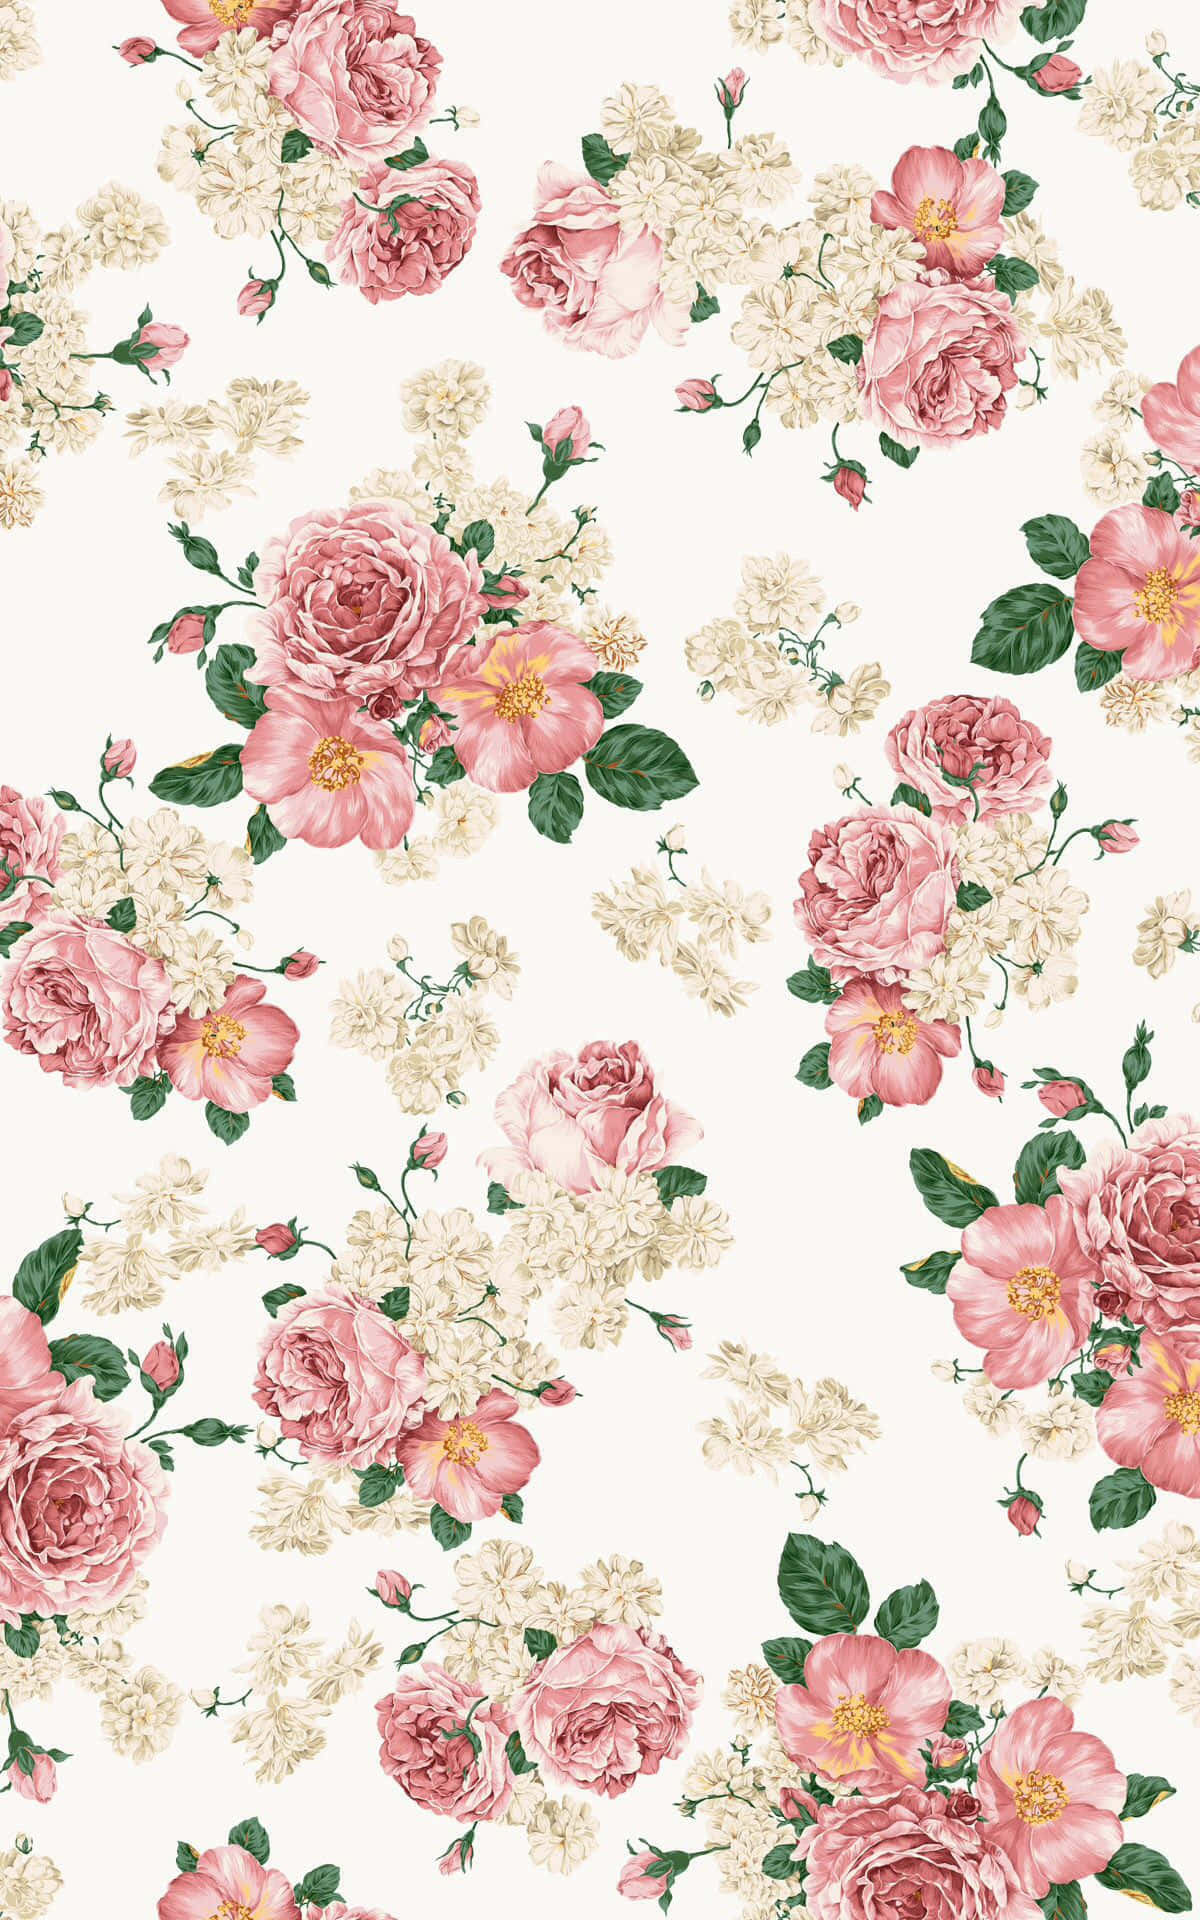 Pink Roses On A White Background Wallpaper